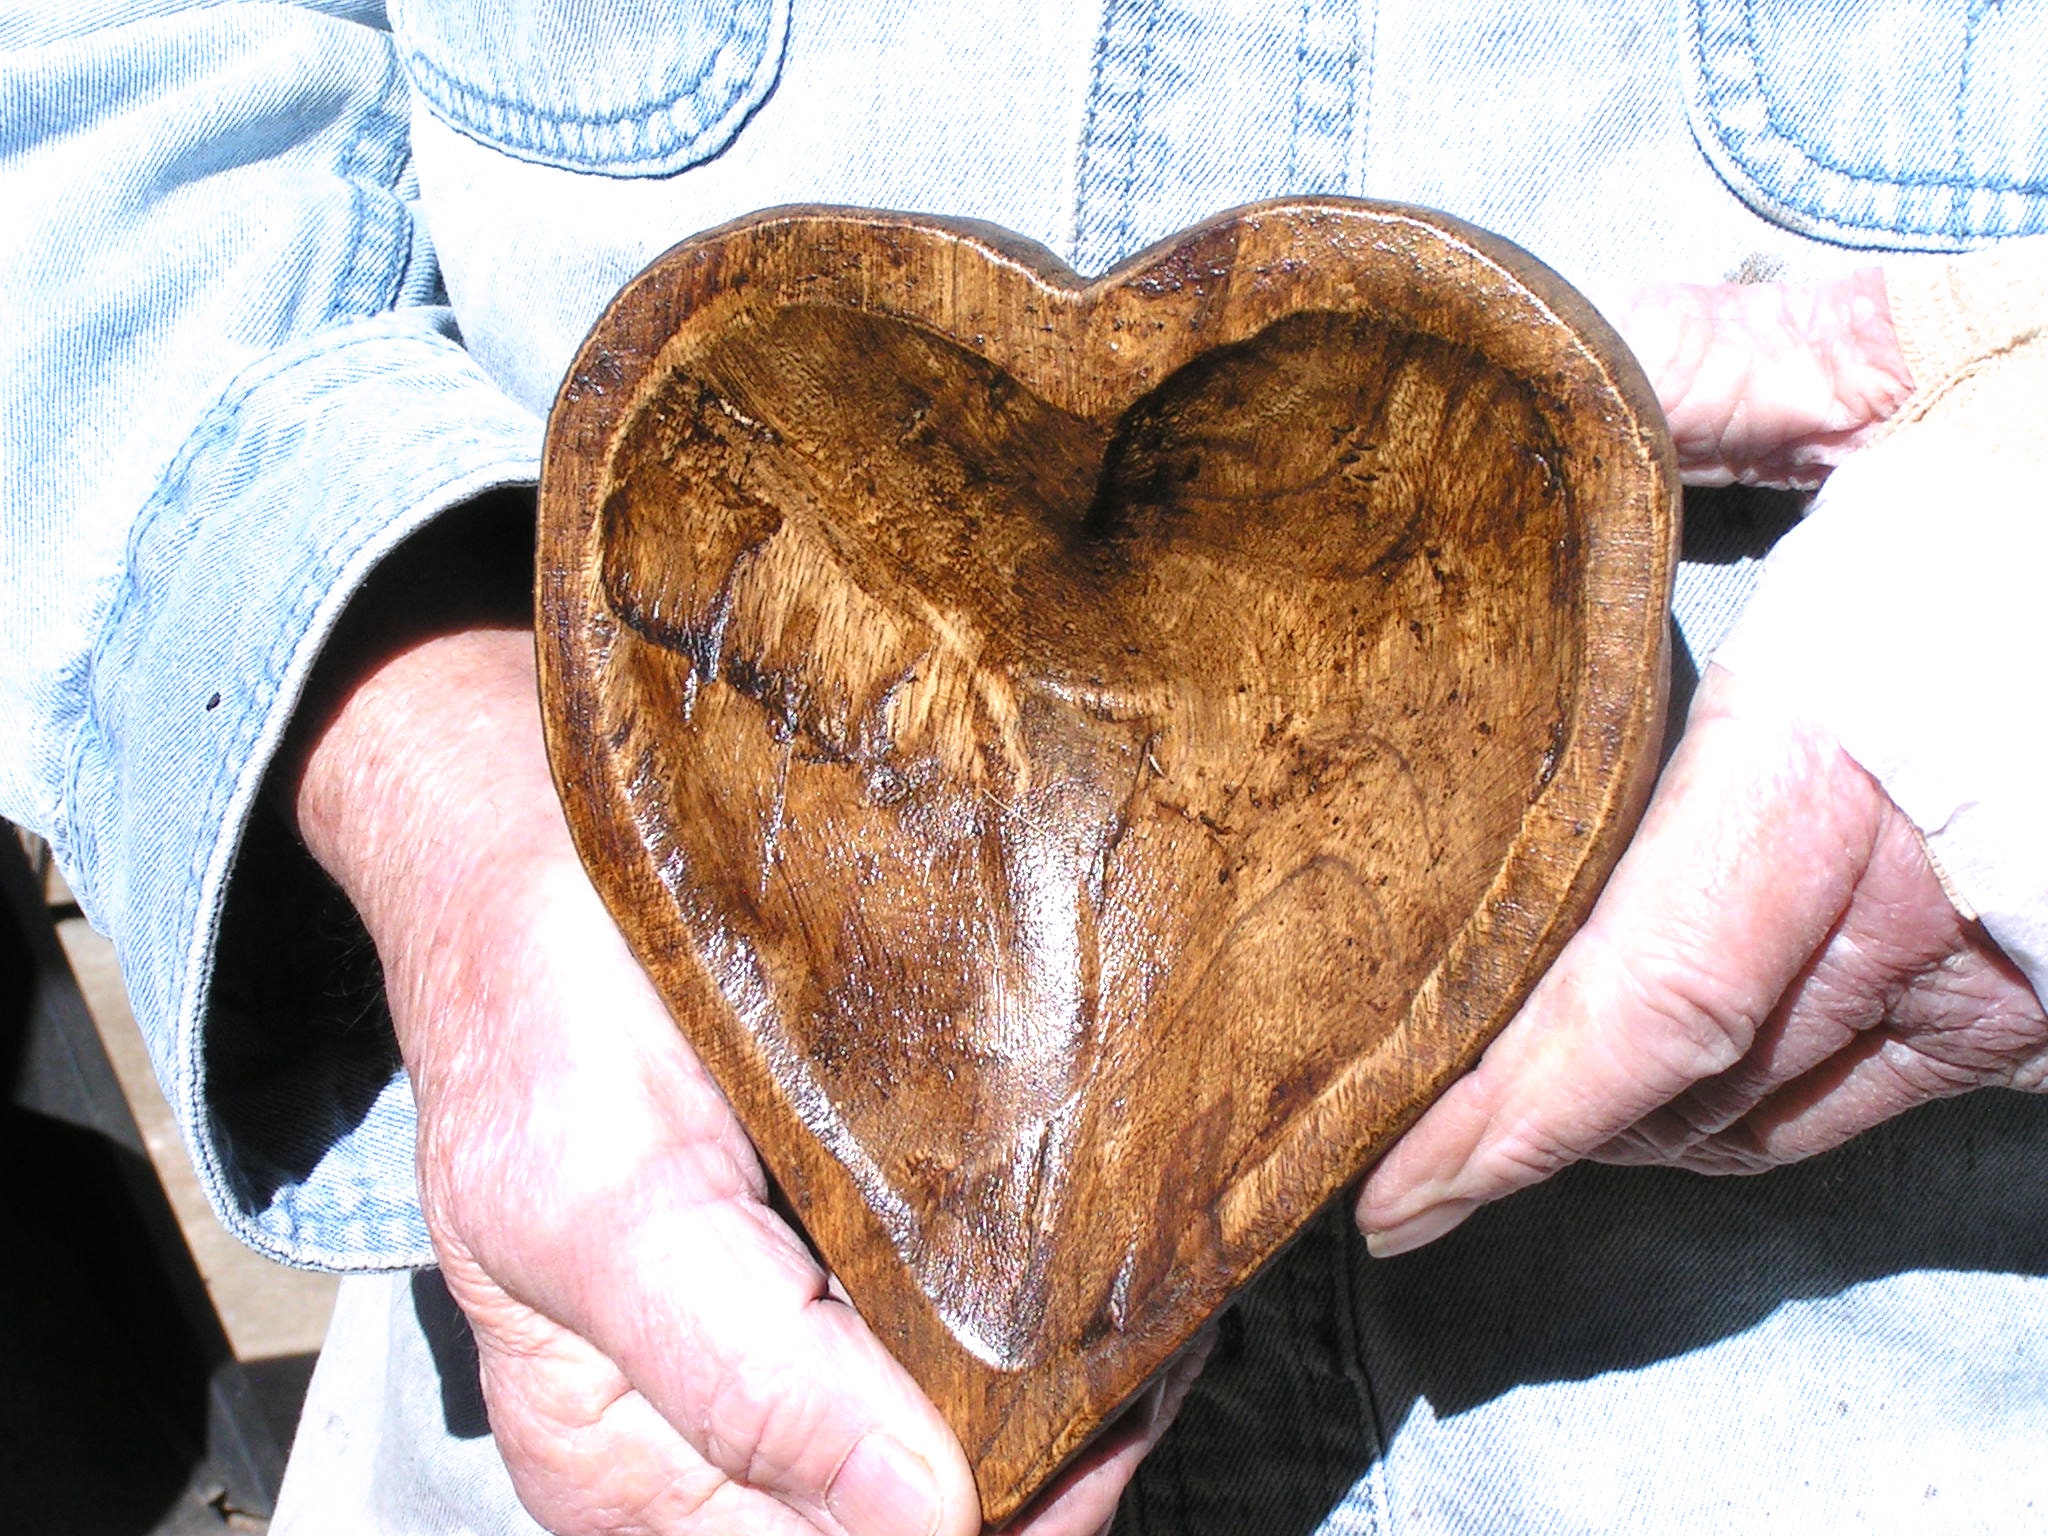 Wood Love Heart Hand Carved Heart solid Wood Love Heart Carving